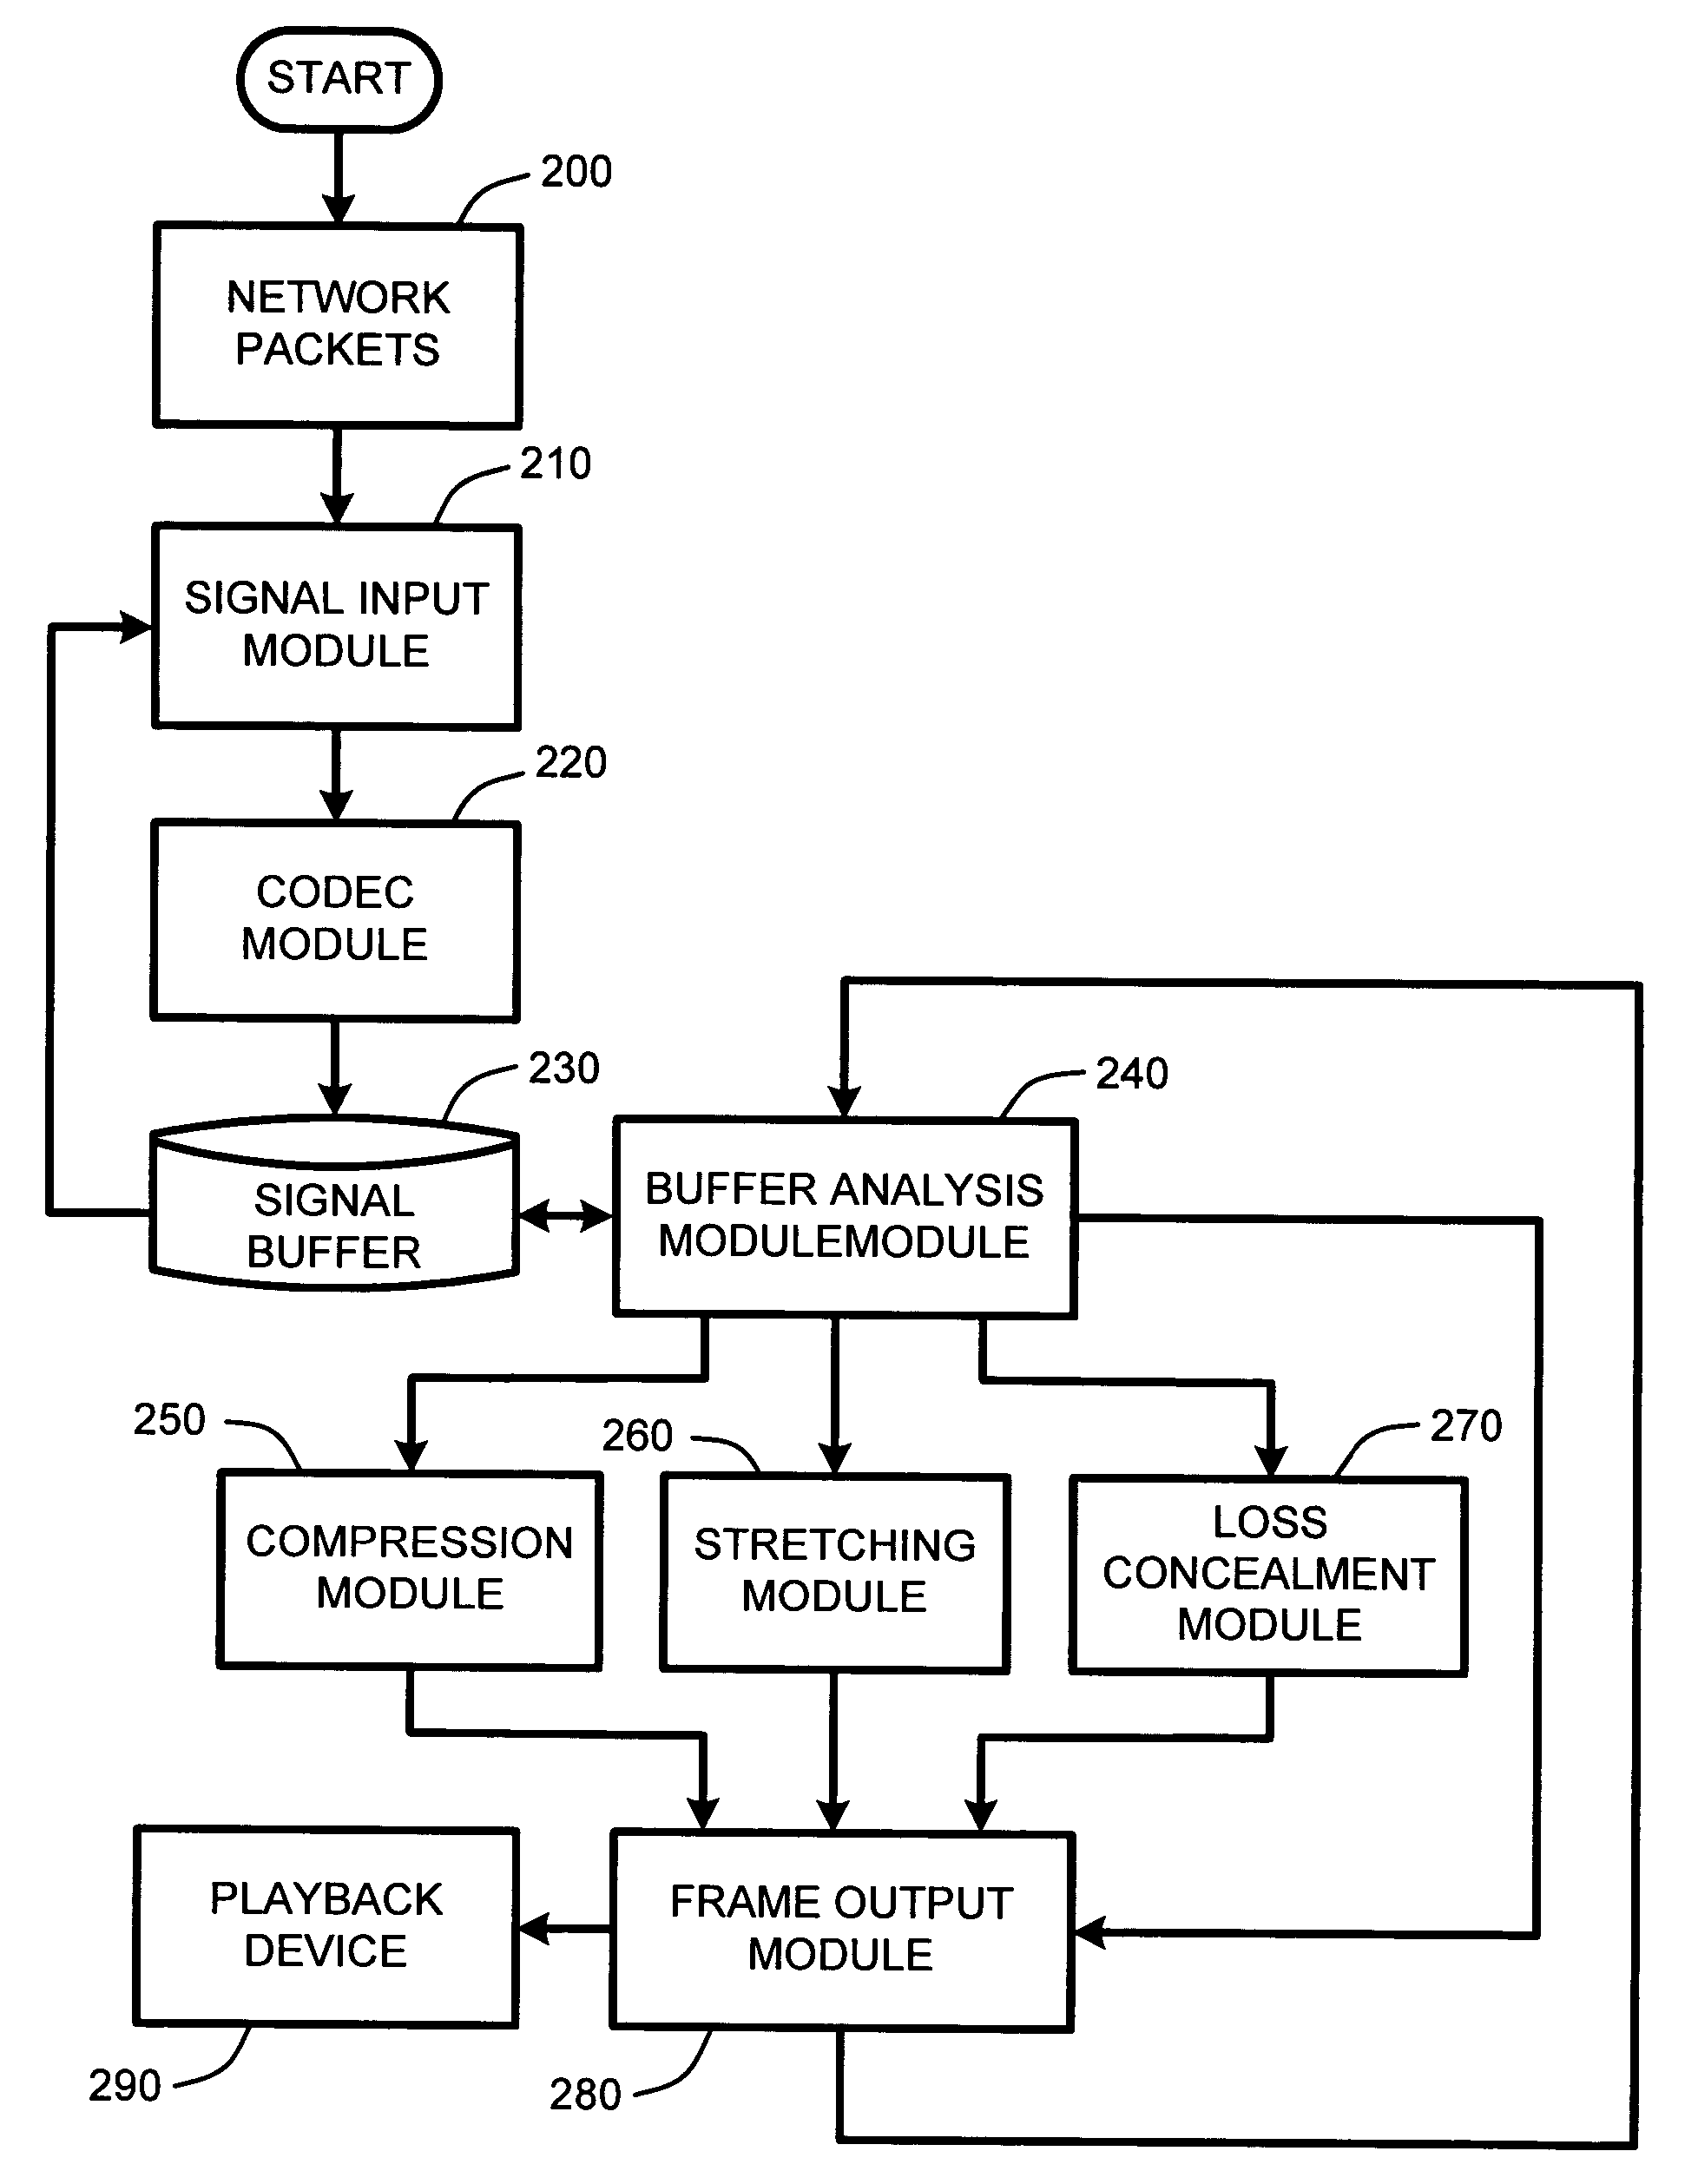 System and method for real-time jitter control and packet-loss concealment in an audio signal